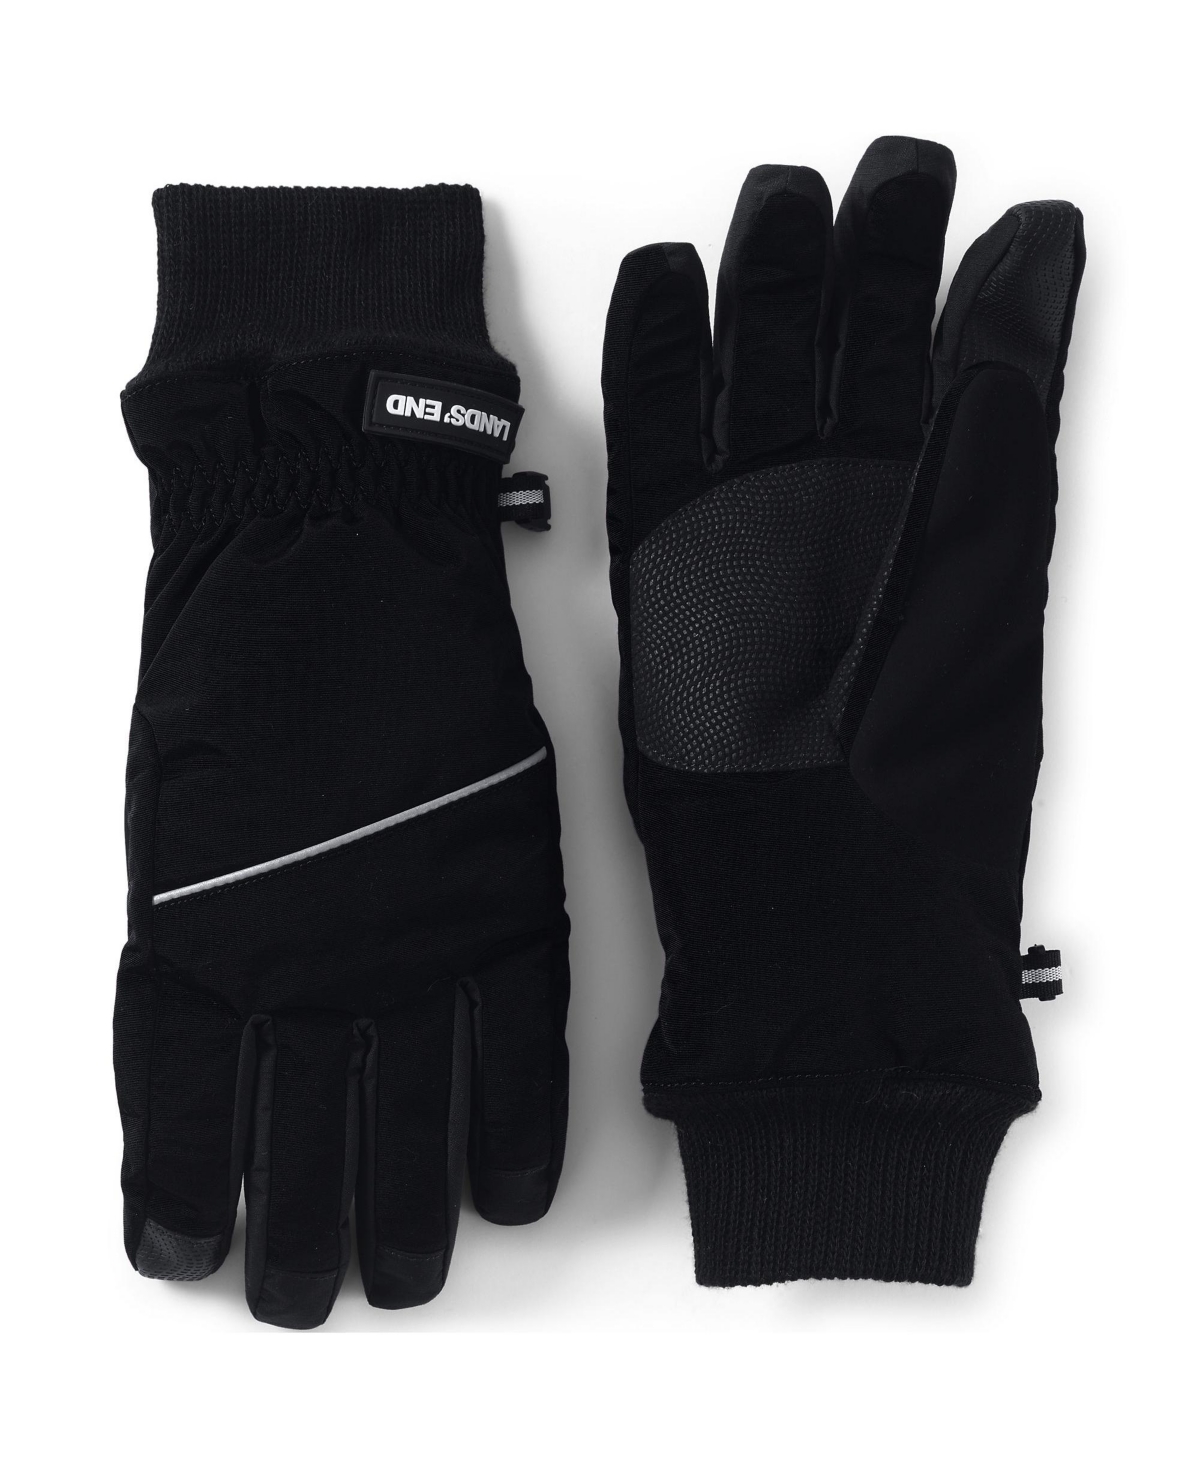 Women's Ez Touch Screen Squall Winter Gloves - Black